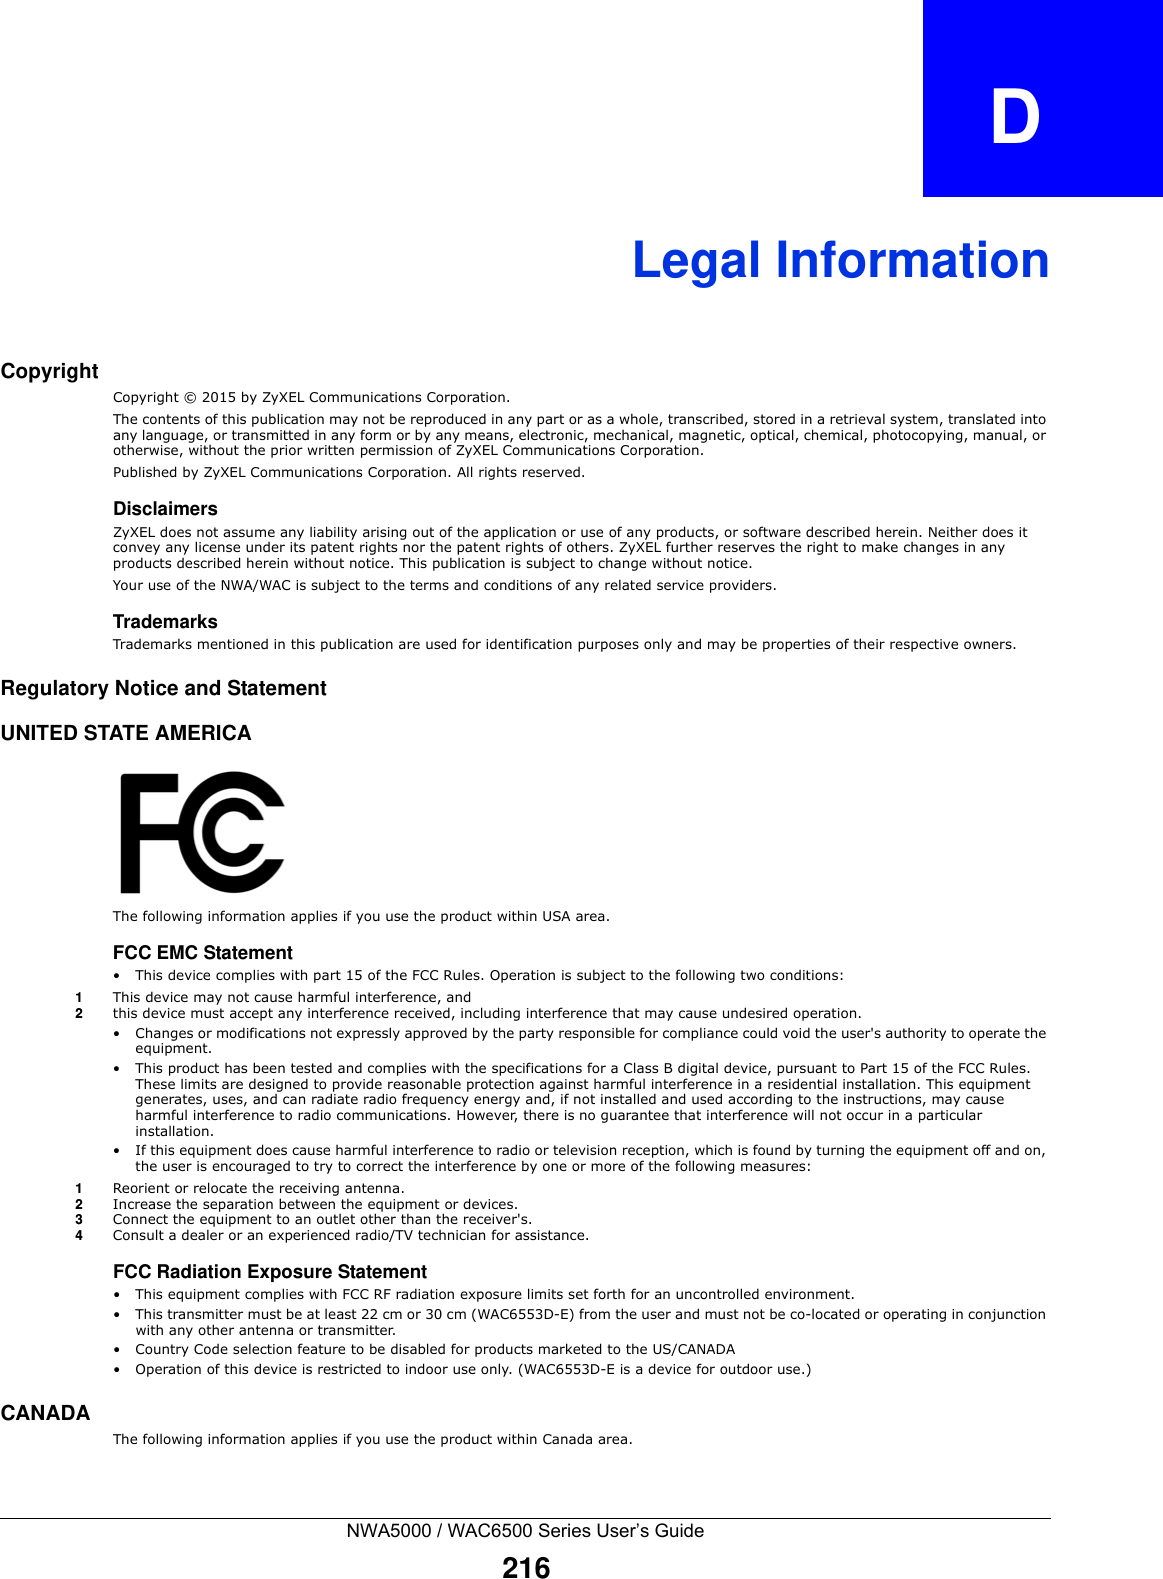 NWA5000 / WAC6500 Series User’s Guide216APPENDIX   DLegal InformationCopyrightCopyright © 2015 by ZyXEL Communications Corporation.The contents of this publication may not be reproduced in any part or as a whole, transcribed, stored in a retrieval system, translated into any language, or transmitted in any form or by any means, electronic, mechanical, magnetic, optical, chemical, photocopying, manual, or otherwise, without the prior written permission of ZyXEL Communications Corporation.Published by ZyXEL Communications Corporation. All rights reserved.DisclaimersZyXEL does not assume any liability arising out of the application or use of any products, or software described herein. Neither does it convey any license under its patent rights nor the patent rights of others. ZyXEL further reserves the right to make changes in any products described herein without notice. This publication is subject to change without notice.Your use of the NWA/WAC is subject to the terms and conditions of any related service providers. TrademarksTrademarks mentioned in this publication are used for identification purposes only and may be properties of their respective owners.Regulatory Notice and StatementUNITED STATE AMERICAThe following information applies if you use the product within USA area.FCC EMC Statement • This device complies with part 15 of the FCC Rules. Operation is subject to the following two conditions:1This device may not cause harmful interference, and 2this device must accept any interference received, including interference that may cause undesired operation.• Changes or modifications not expressly approved by the party responsible for compliance could void the user&apos;s authority to operate the equipment.• This product has been tested and complies with the specifications for a Class B digital device, pursuant to Part 15 of the FCC Rules. These limits are designed to provide reasonable protection against harmful interference in a residential installation. This equipment generates, uses, and can radiate radio frequency energy and, if not installed and used according to the instructions, may cause harmful interference to radio communications. However, there is no guarantee that interference will not occur in a particular installation. • If this equipment does cause harmful interference to radio or television reception, which is found by turning the equipment off and on, the user is encouraged to try to correct the interference by one or more of the following measures:1Reorient or relocate the receiving antenna.2Increase the separation between the equipment or devices.3Connect the equipment to an outlet other than the receiver&apos;s.4Consult a dealer or an experienced radio/TV technician for assistance.FCC Radiation Exposure Statement• This equipment complies with FCC RF radiation exposure limits set forth for an uncontrolled environment. • This transmitter must be at least 22 cm or 30 cm (WAC6553D-E) from the user and must not be co-located or operating in conjunction with any other antenna or transmitter.• Country Code selection feature to be disabled for products marketed to the US/CANADA• Operation of this device is restricted to indoor use only. (WAC6553D-E is a device for outdoor use.)CANADAThe following information applies if you use the product within Canada area.